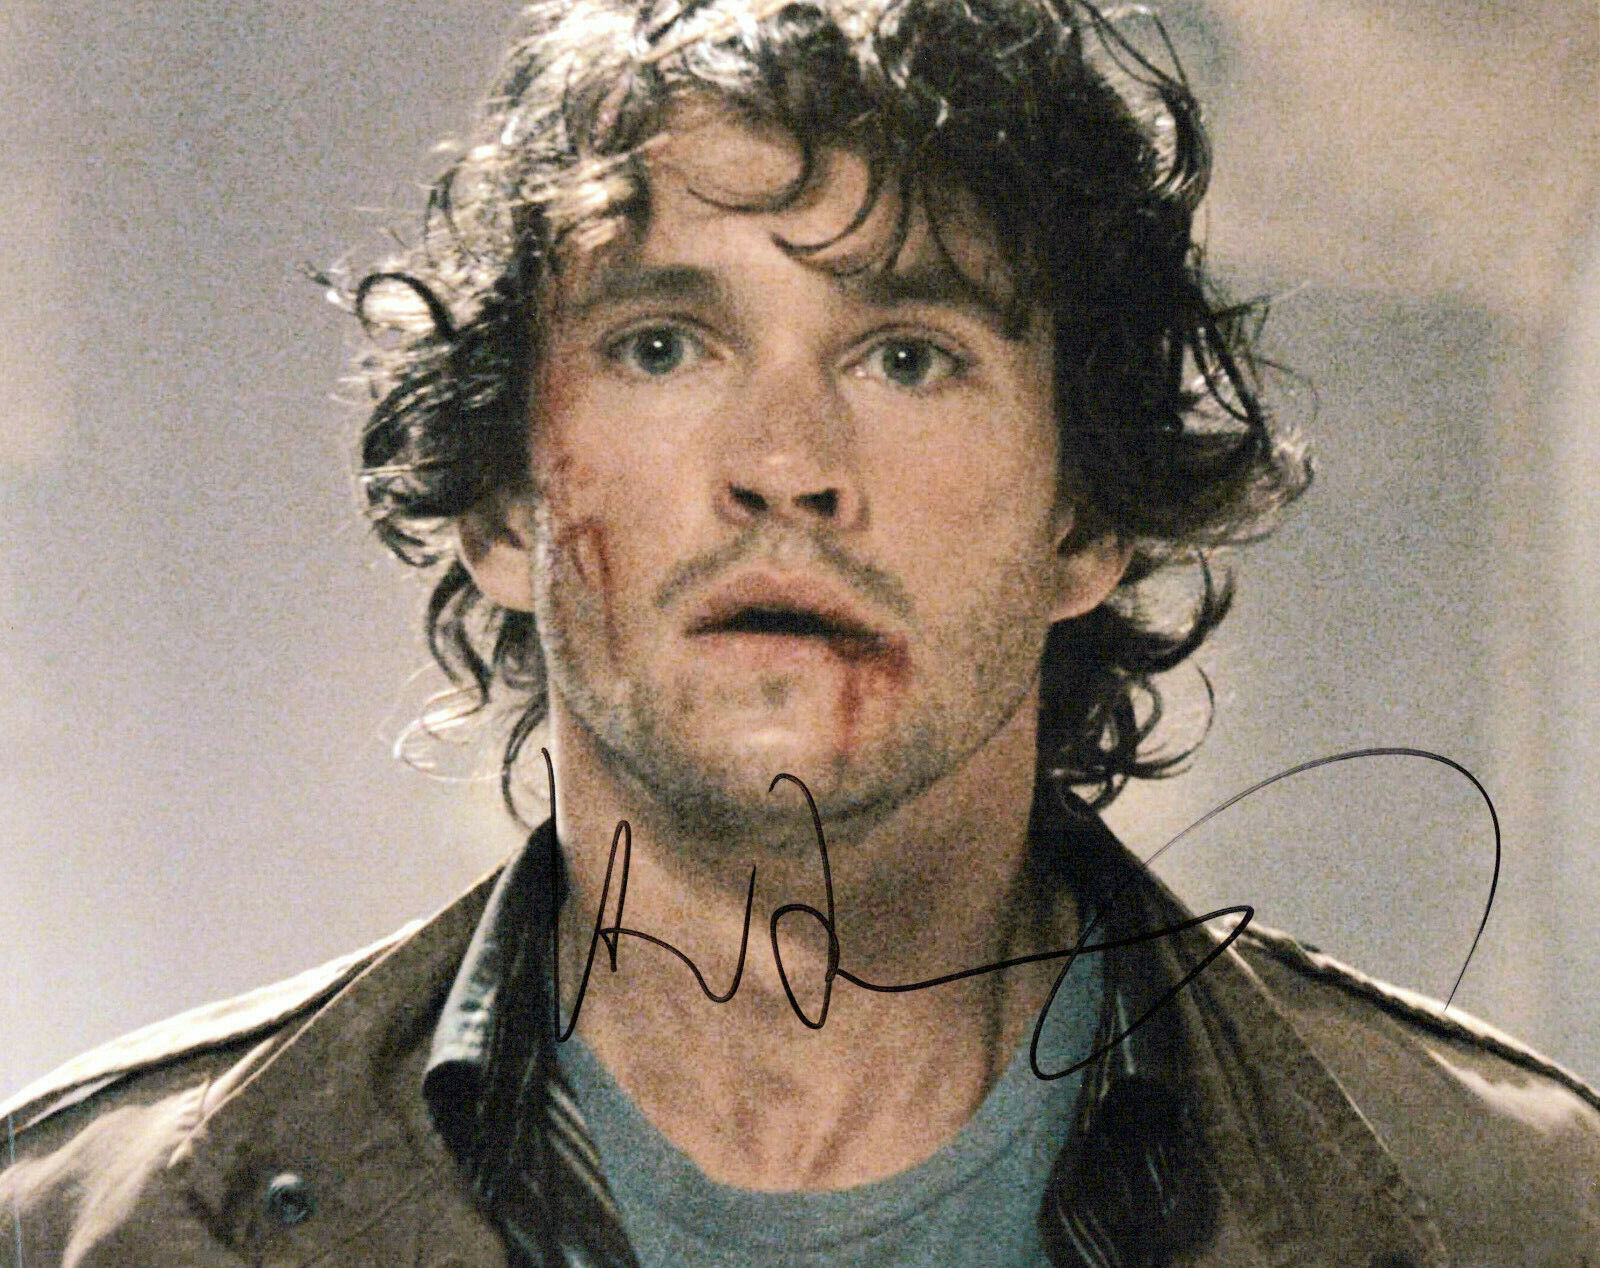 Hugh Dancy Blood and Chocolate autographed Photo Poster painting signed 8x10 #3 Aiden